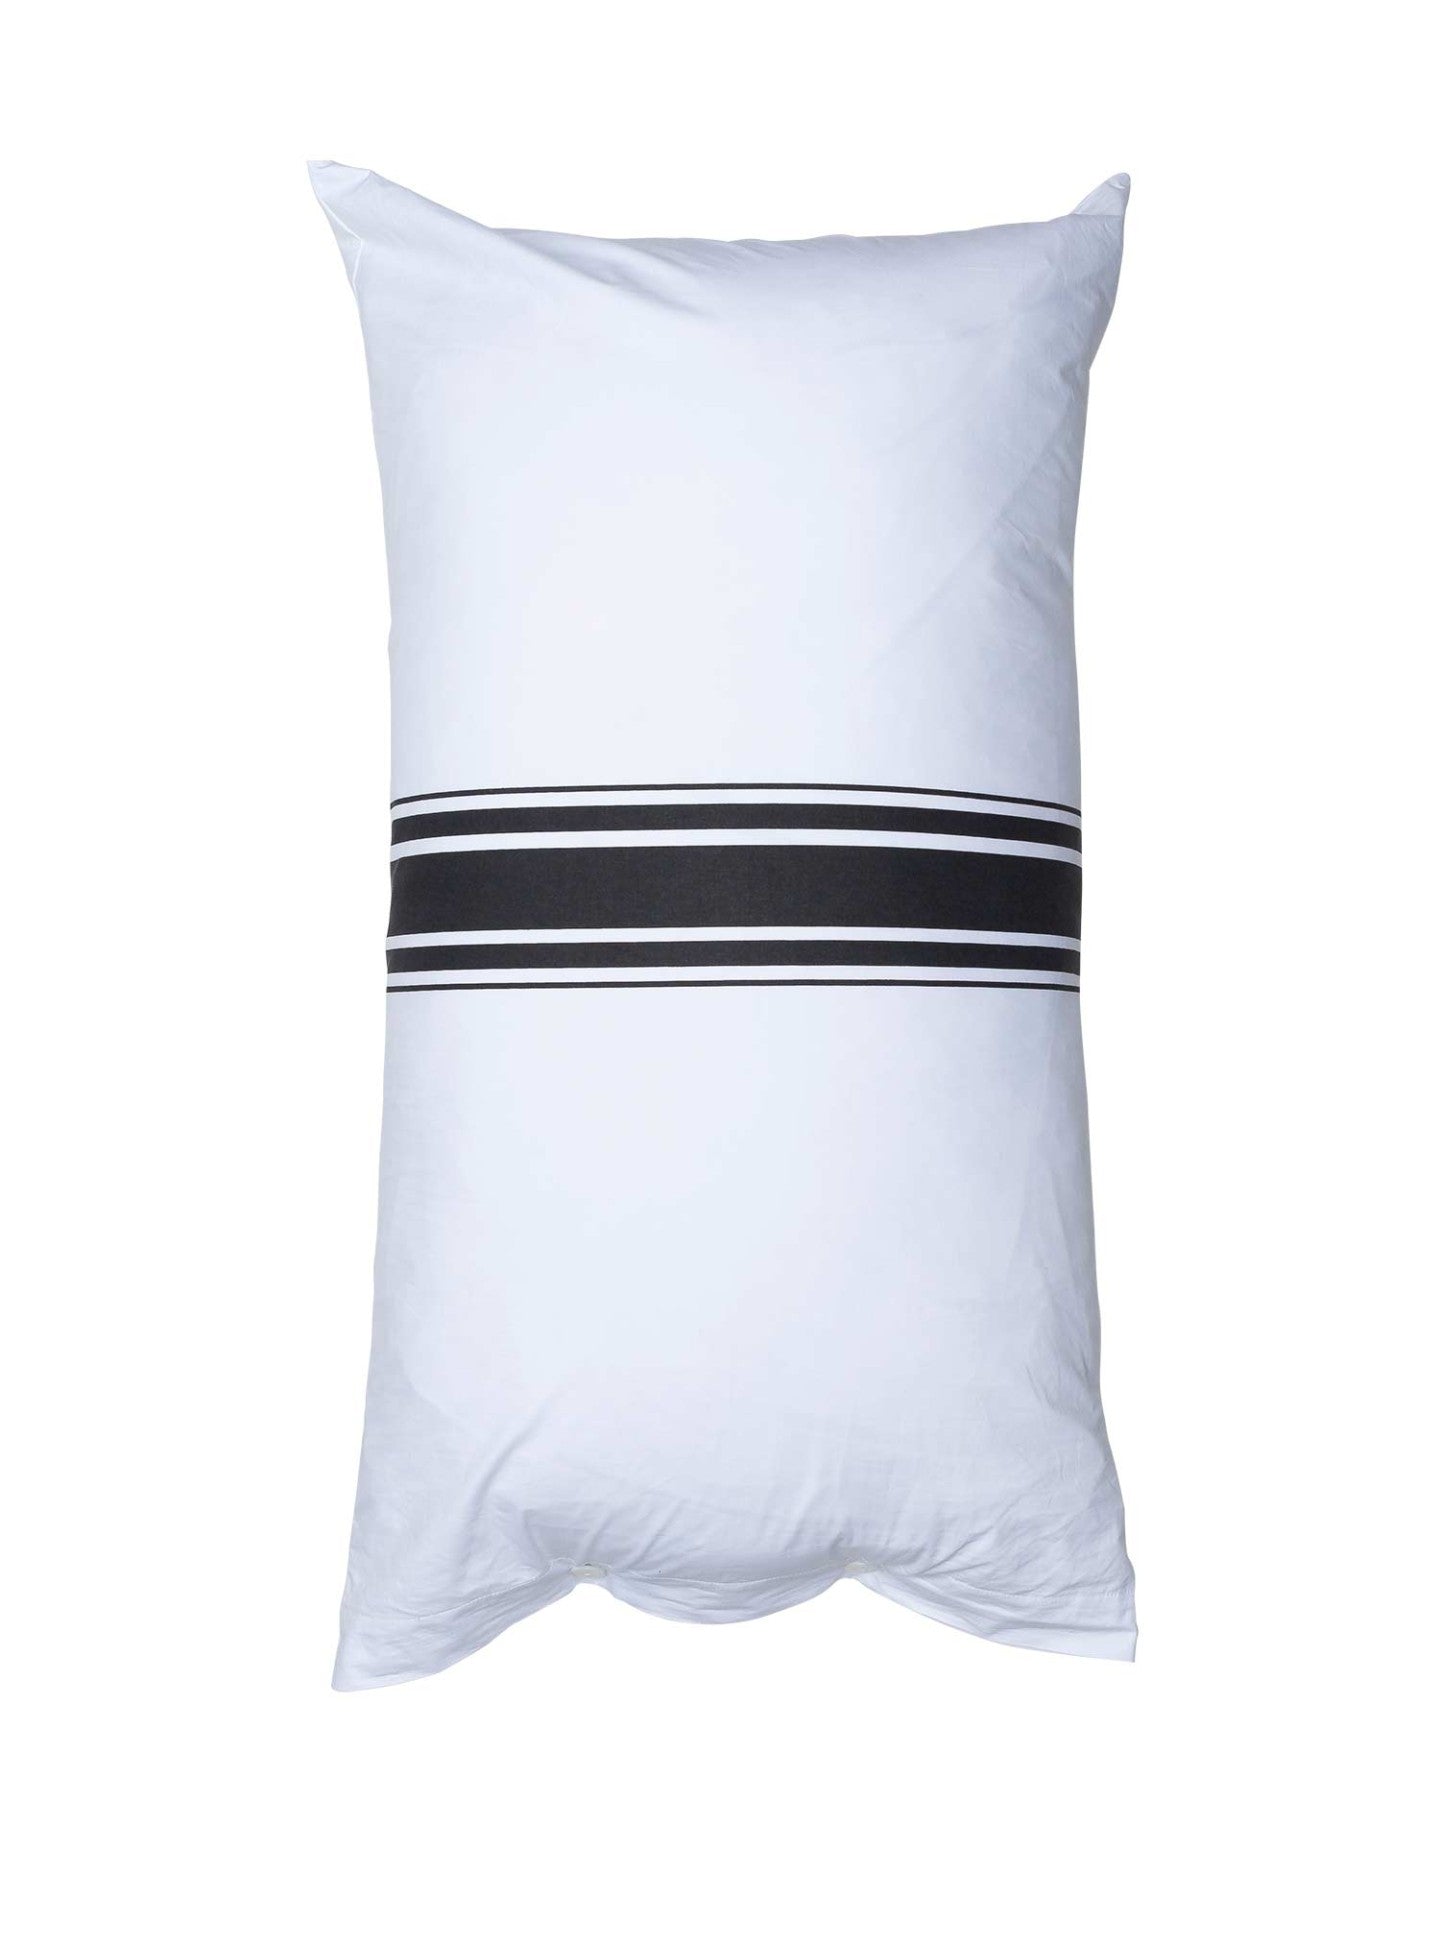 The Lodge Pillow